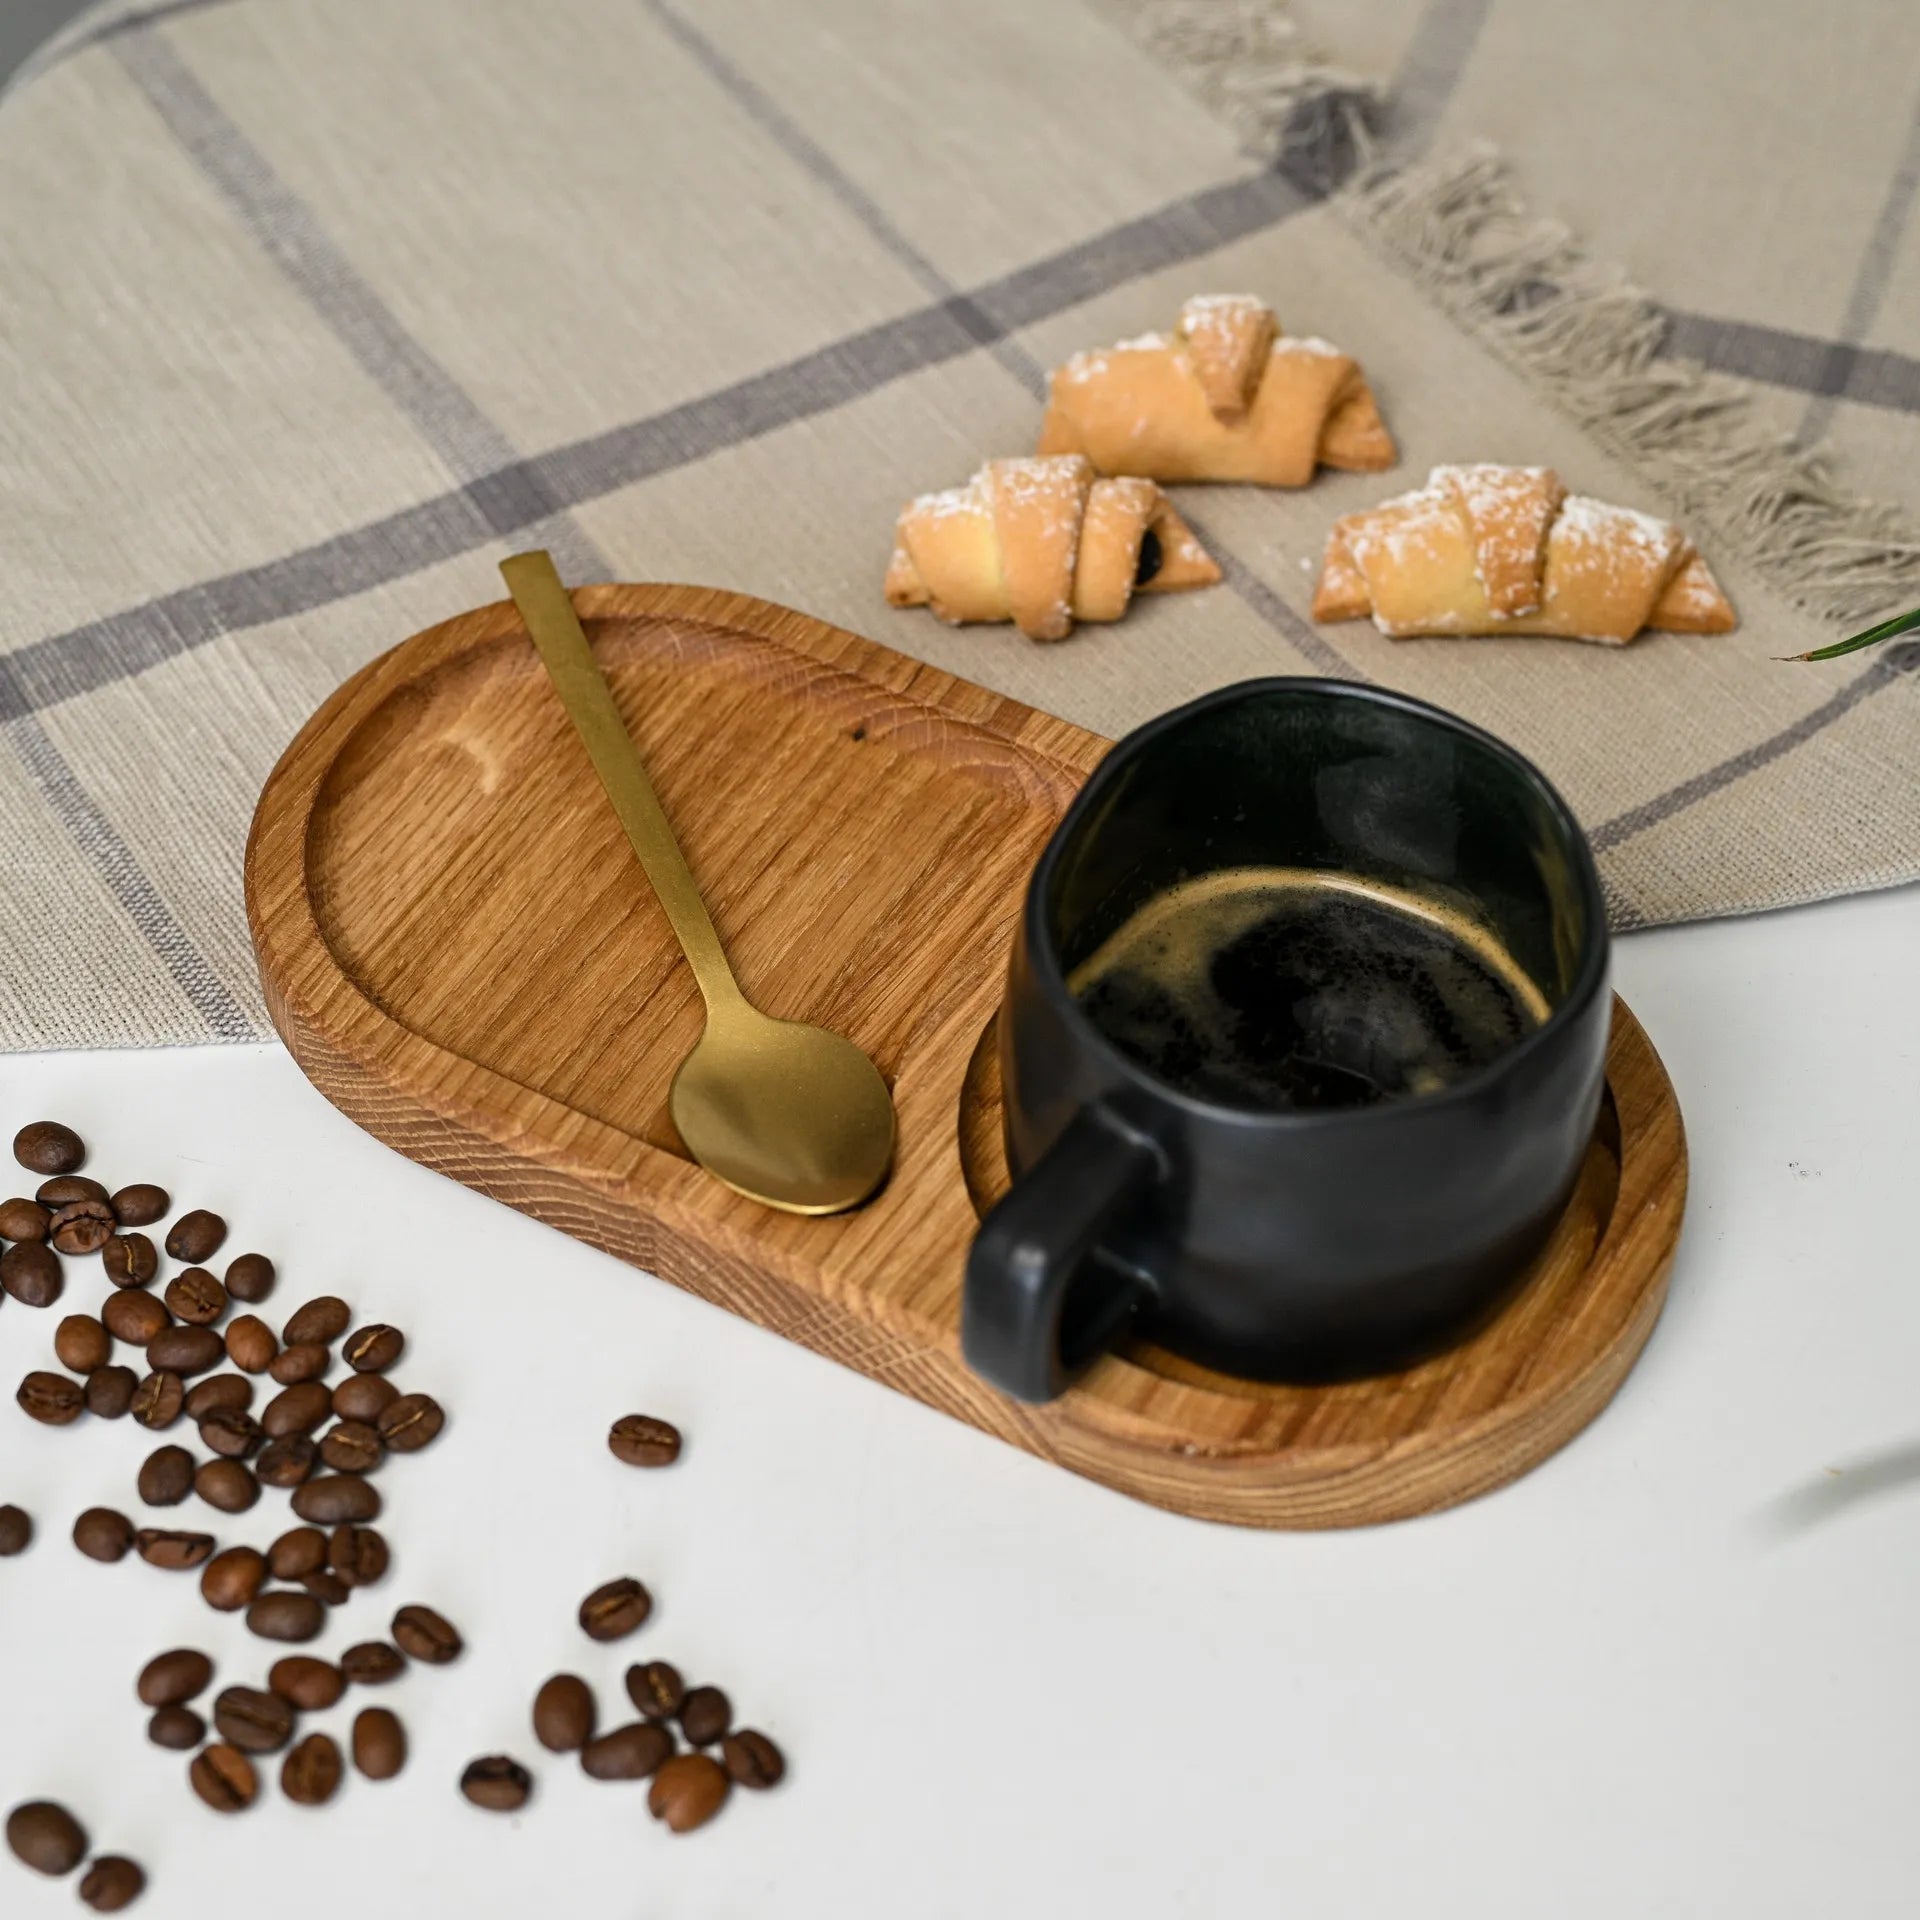 Serving board for restaurants, made from high-quality wood, combining functionality with rustic charm.